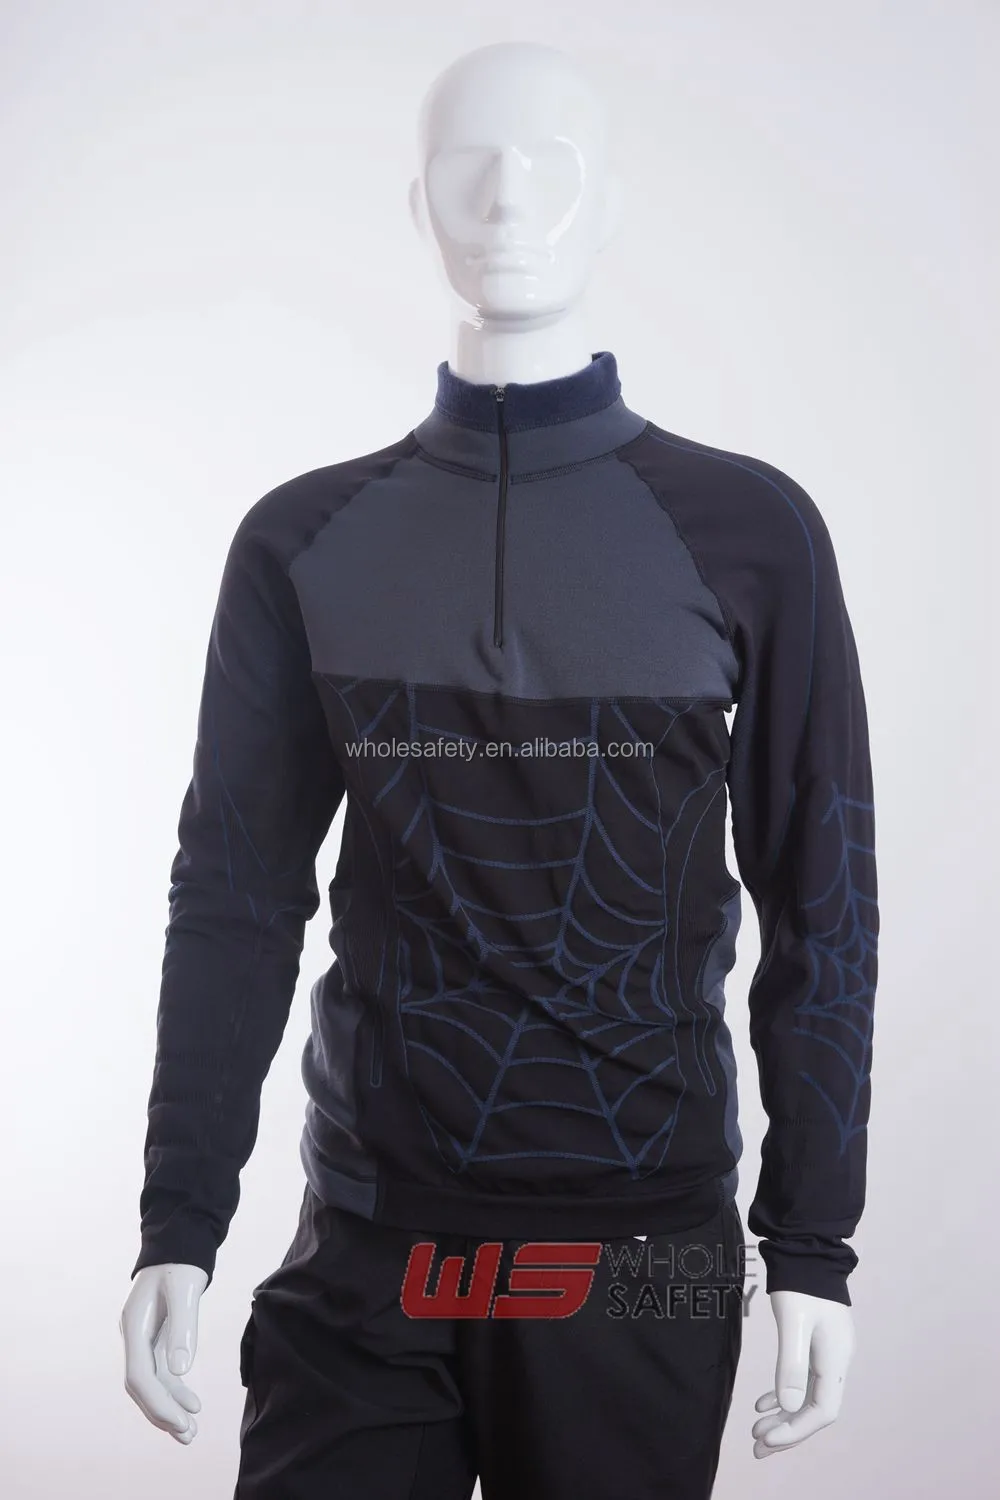 
Body Engineered Long Sleeve T-shirt working comfort Warm and dry thermal clothing 